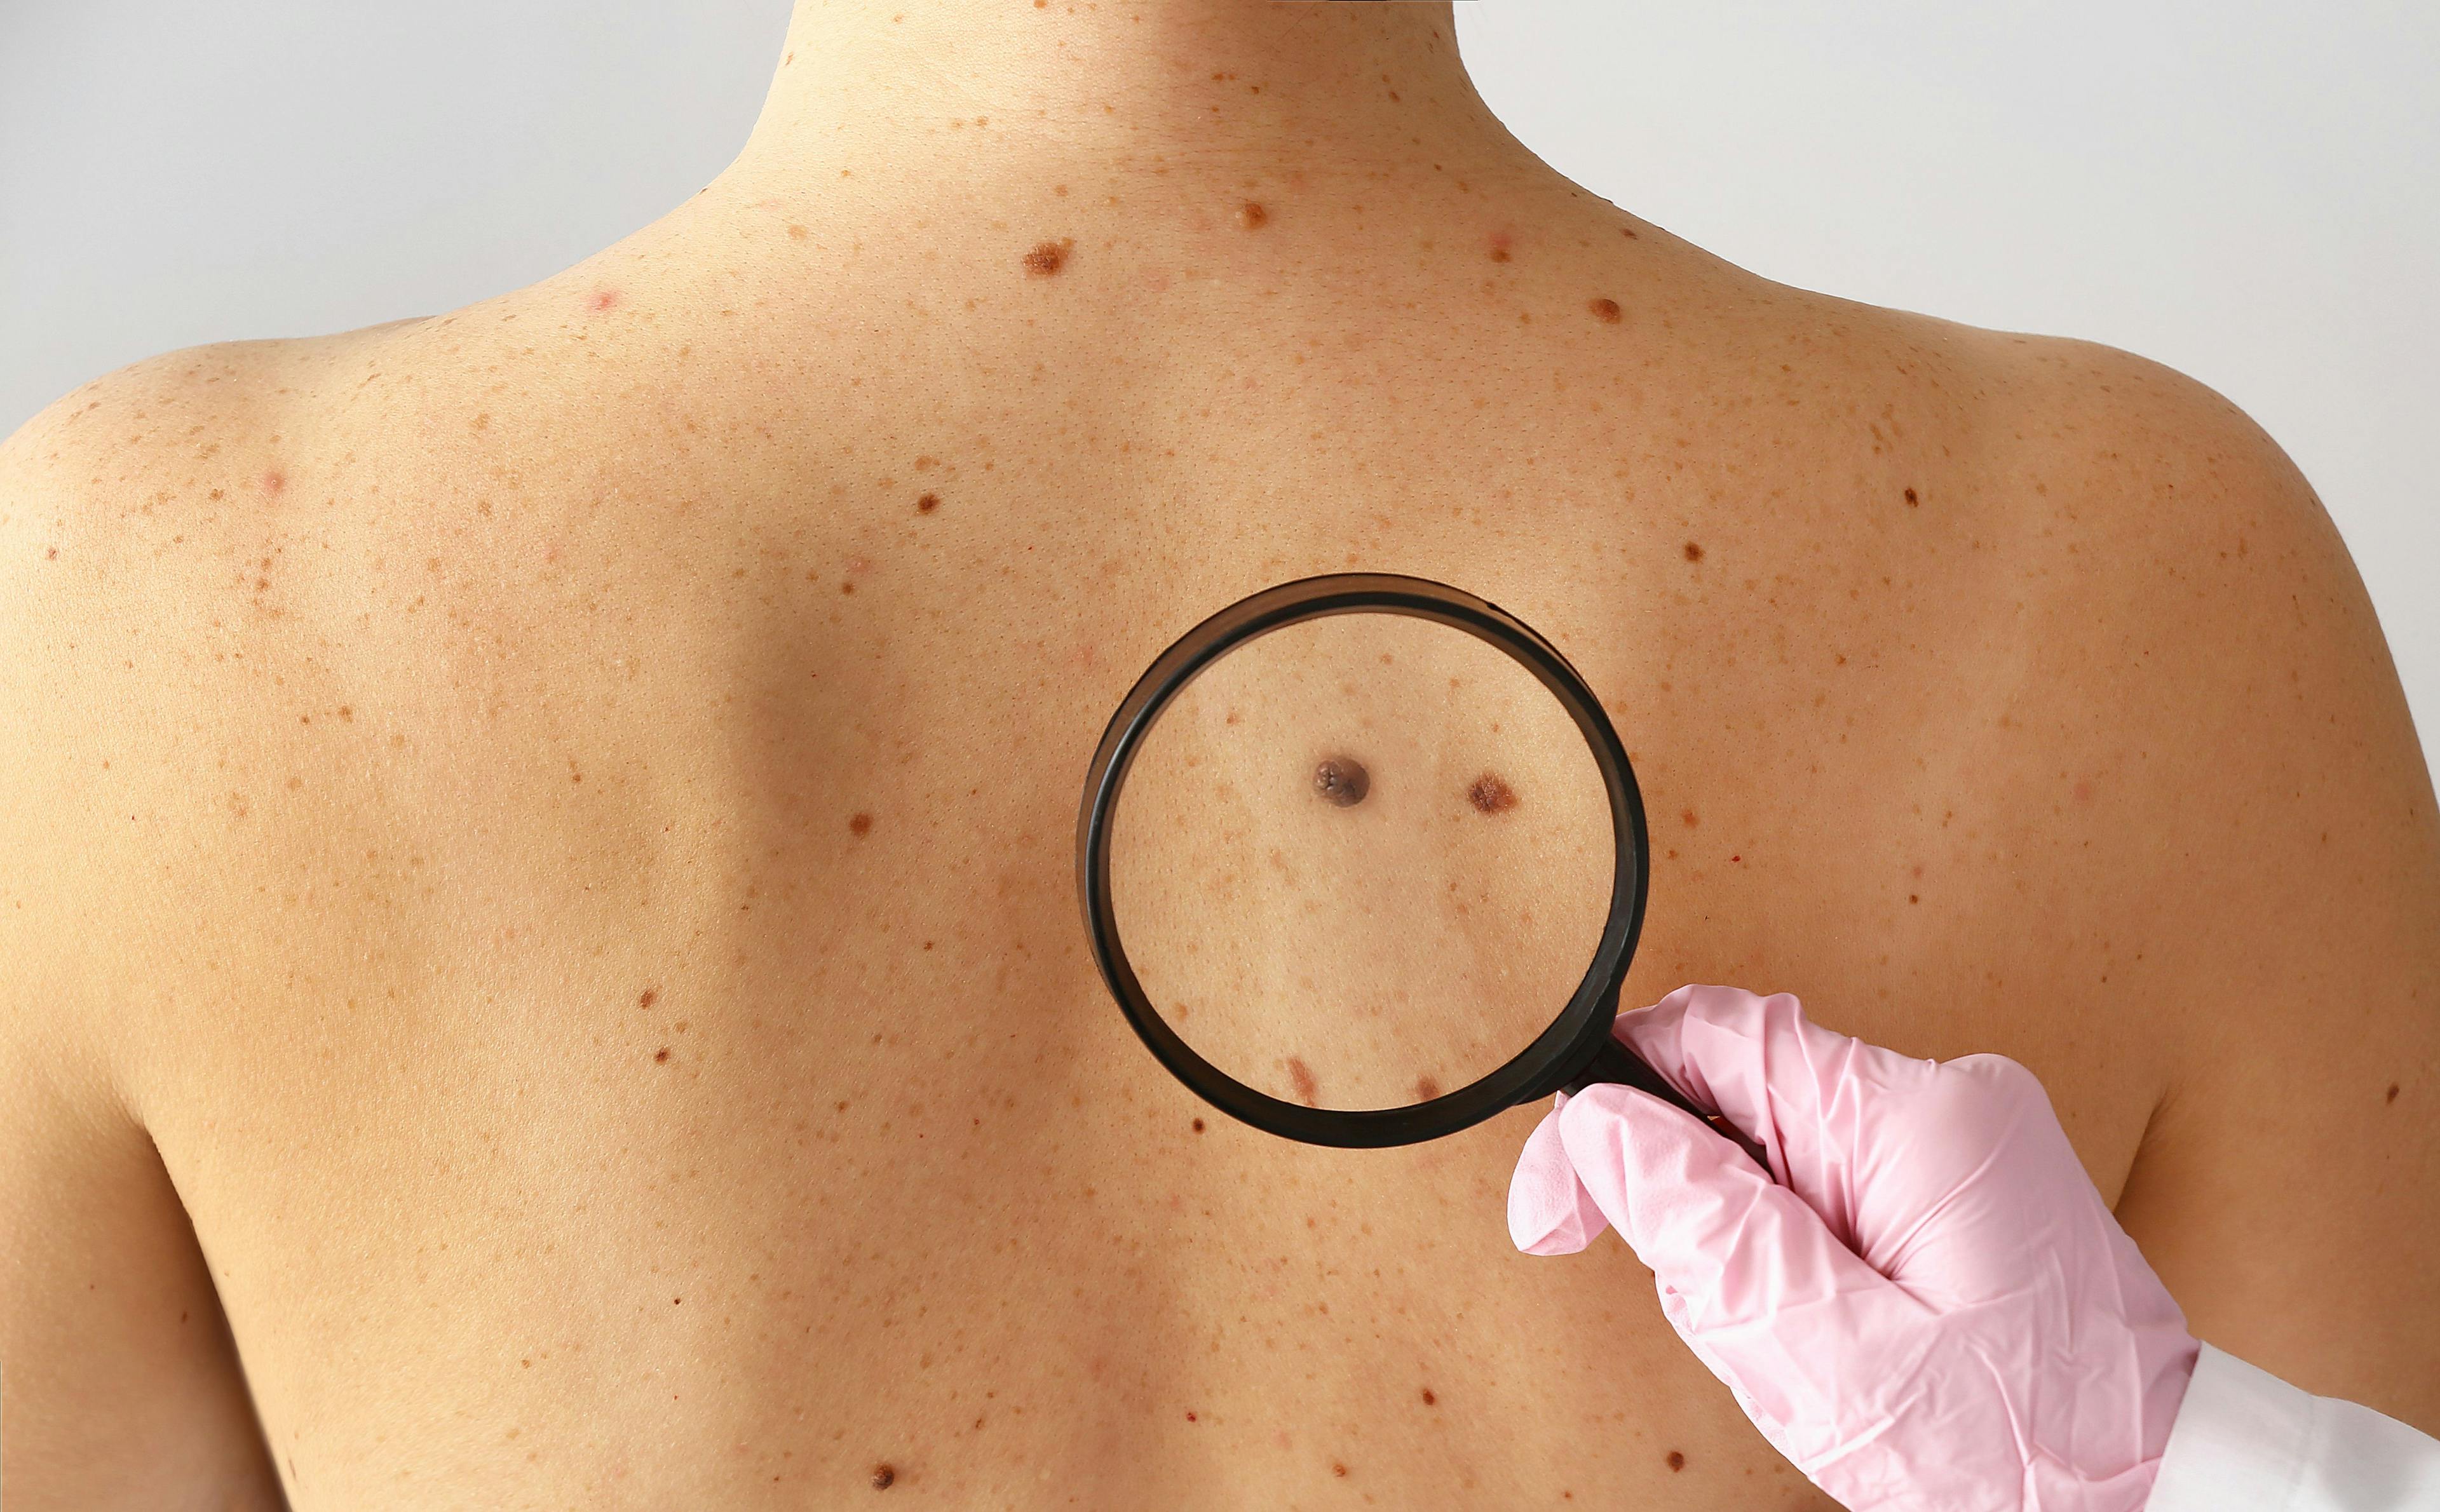 Precision Dermatology: Takeaways for Skin Cancer, Other Conditions